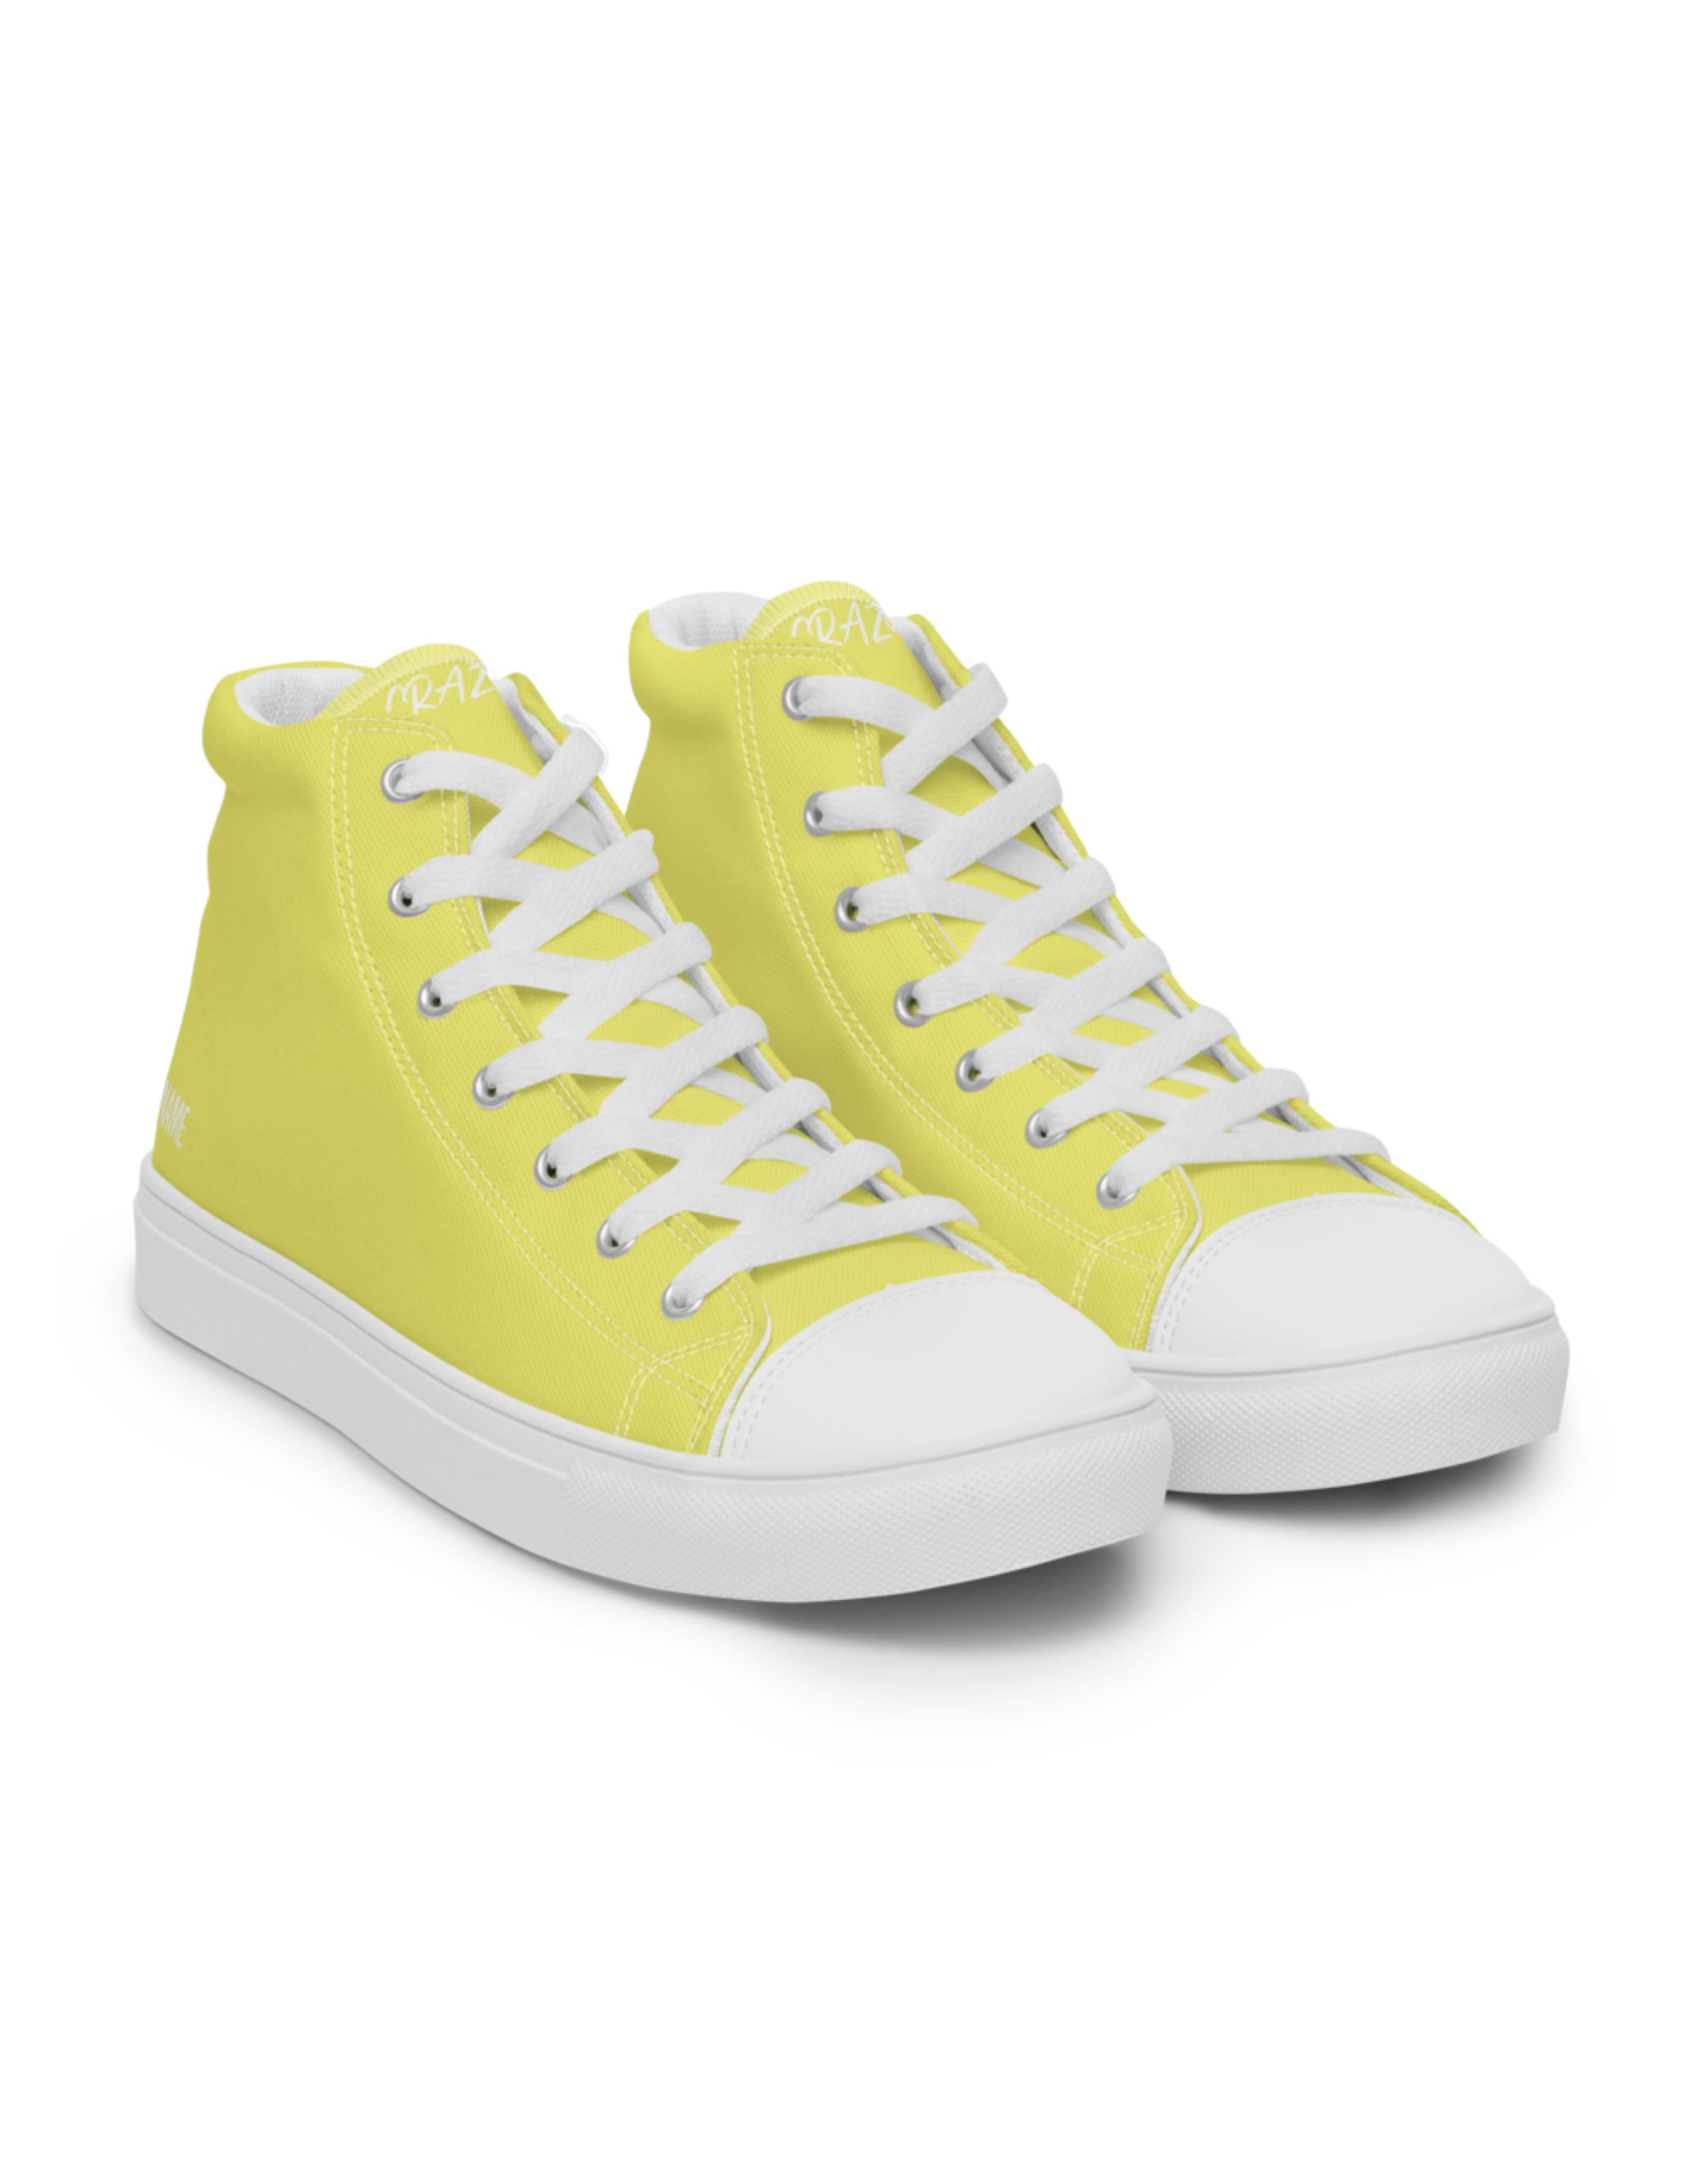 Women's yellow high-top canvas sneakers "SAY MY NAME"